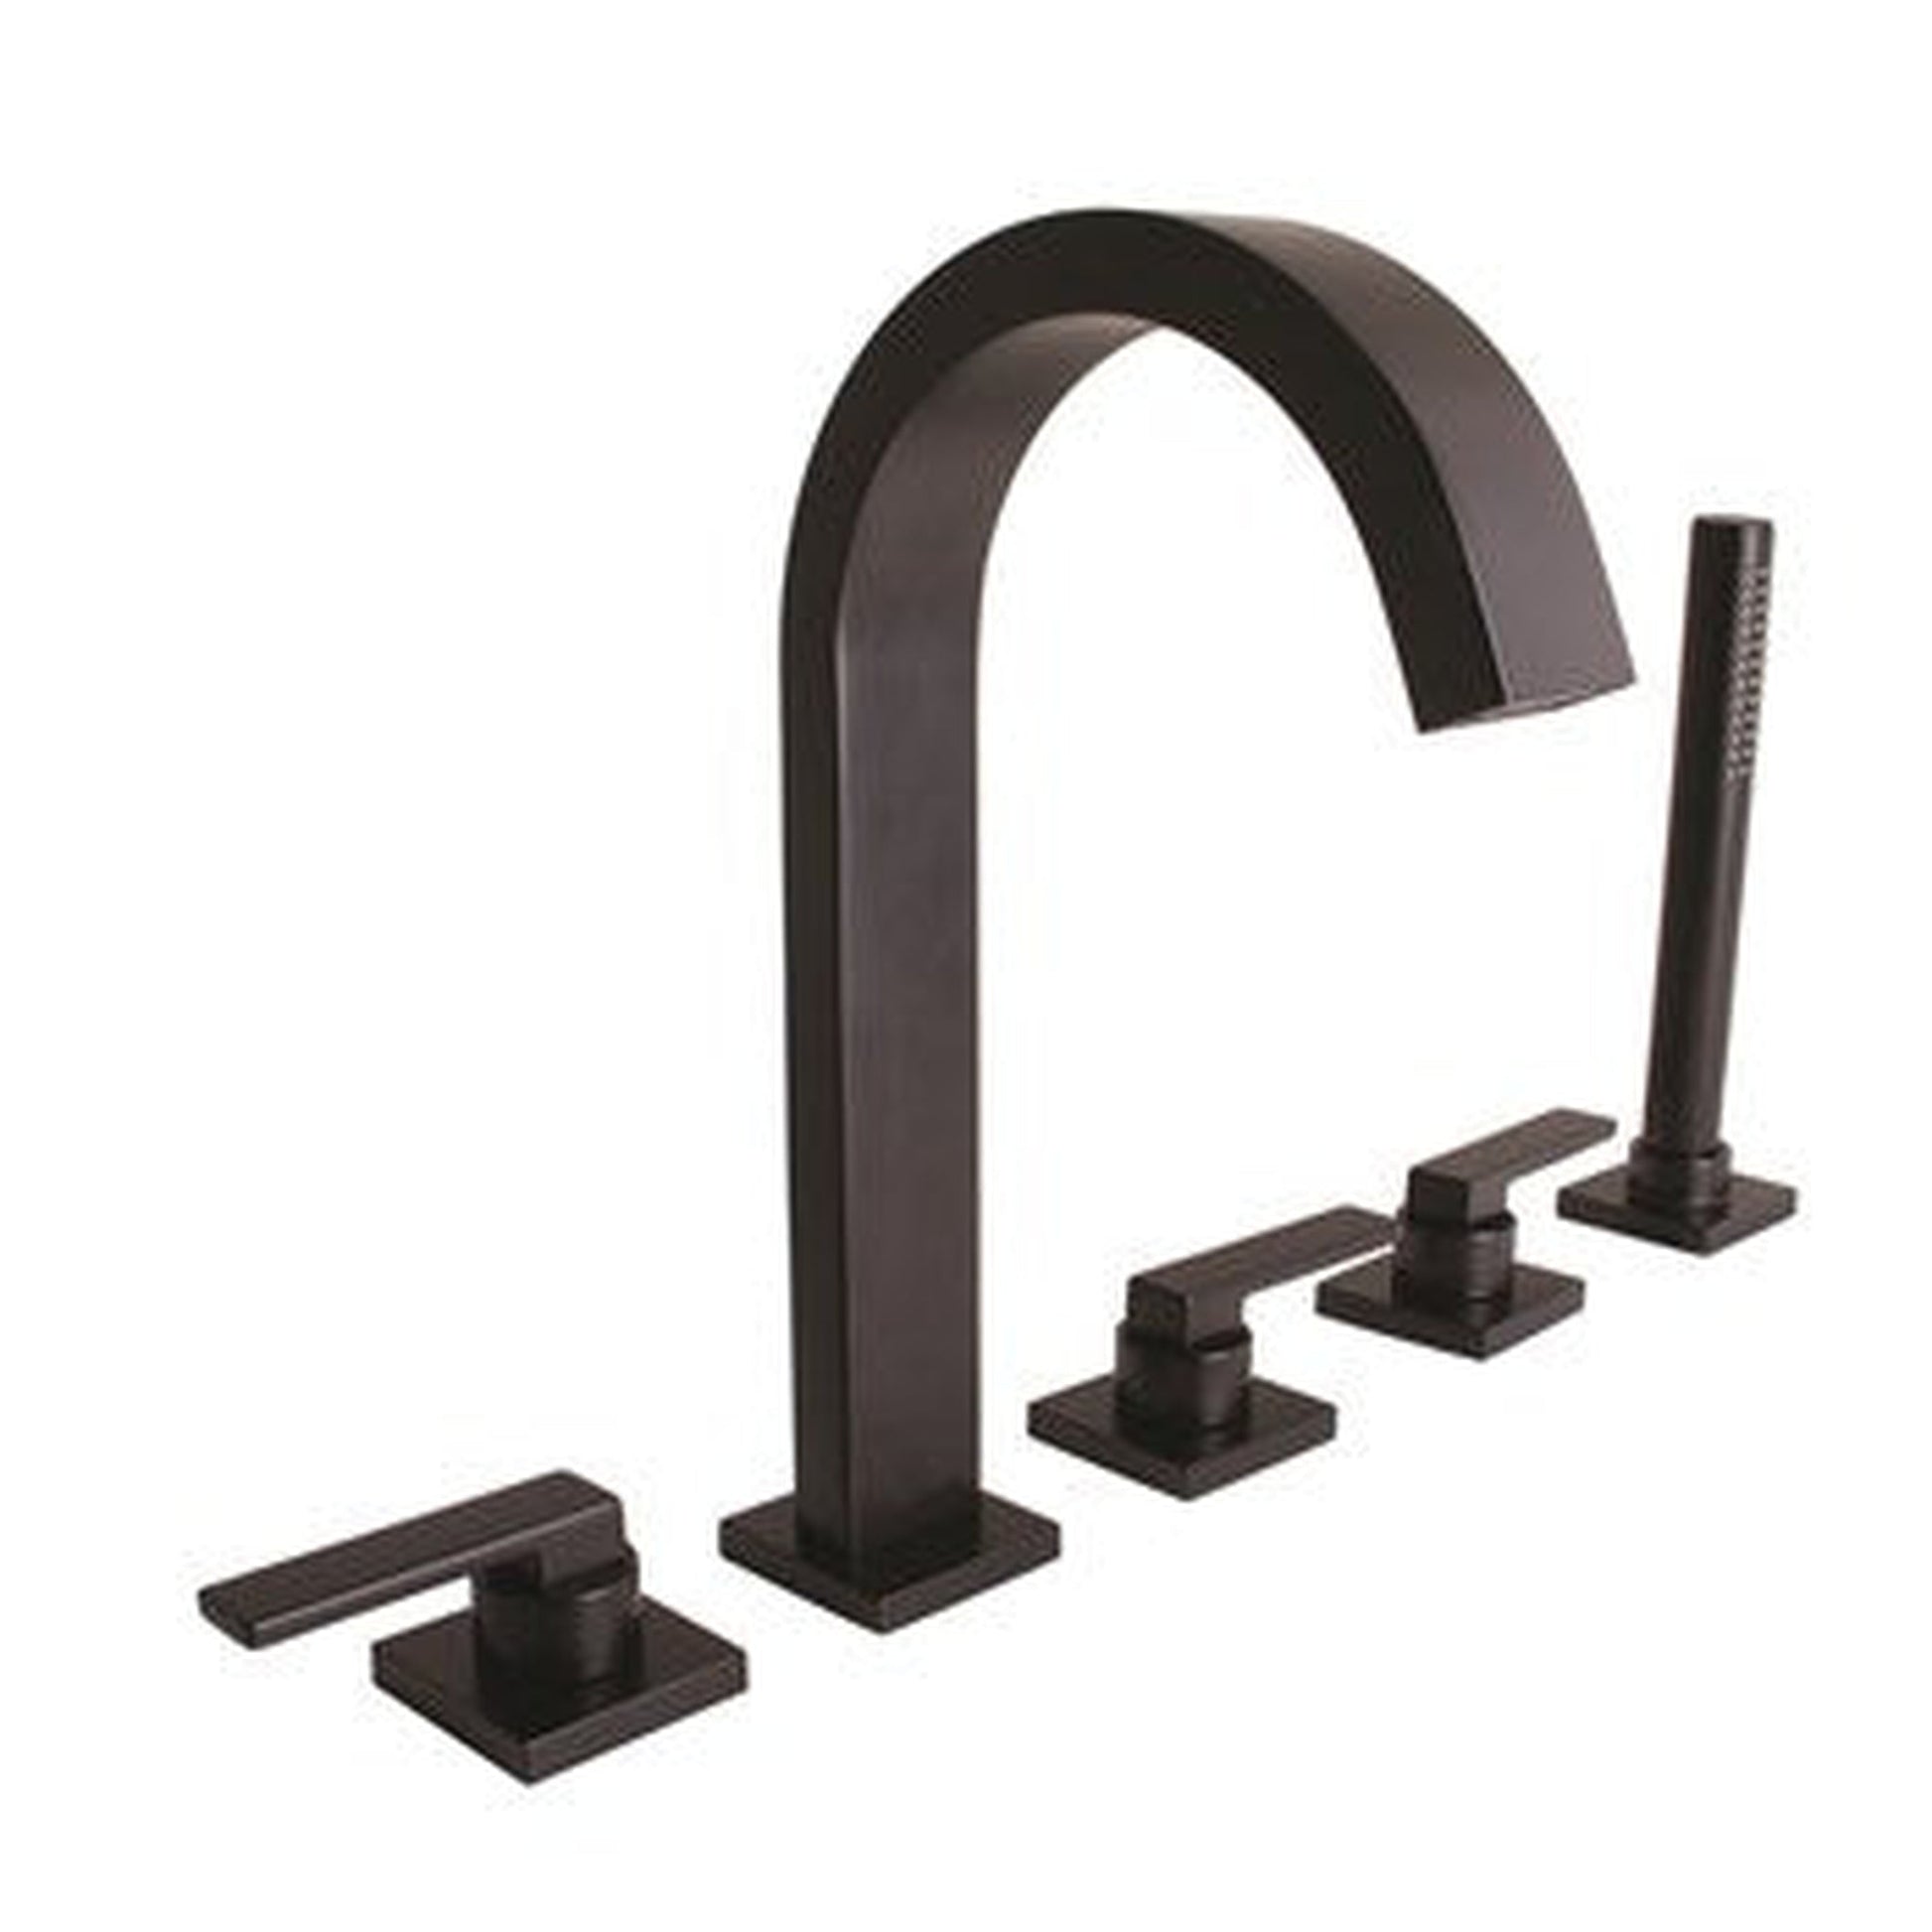 Speakman Lura 5-Hole 5.8 GPM Matte Black Roman Tub System Faucet With Flat Lever Handles and Hand Shower